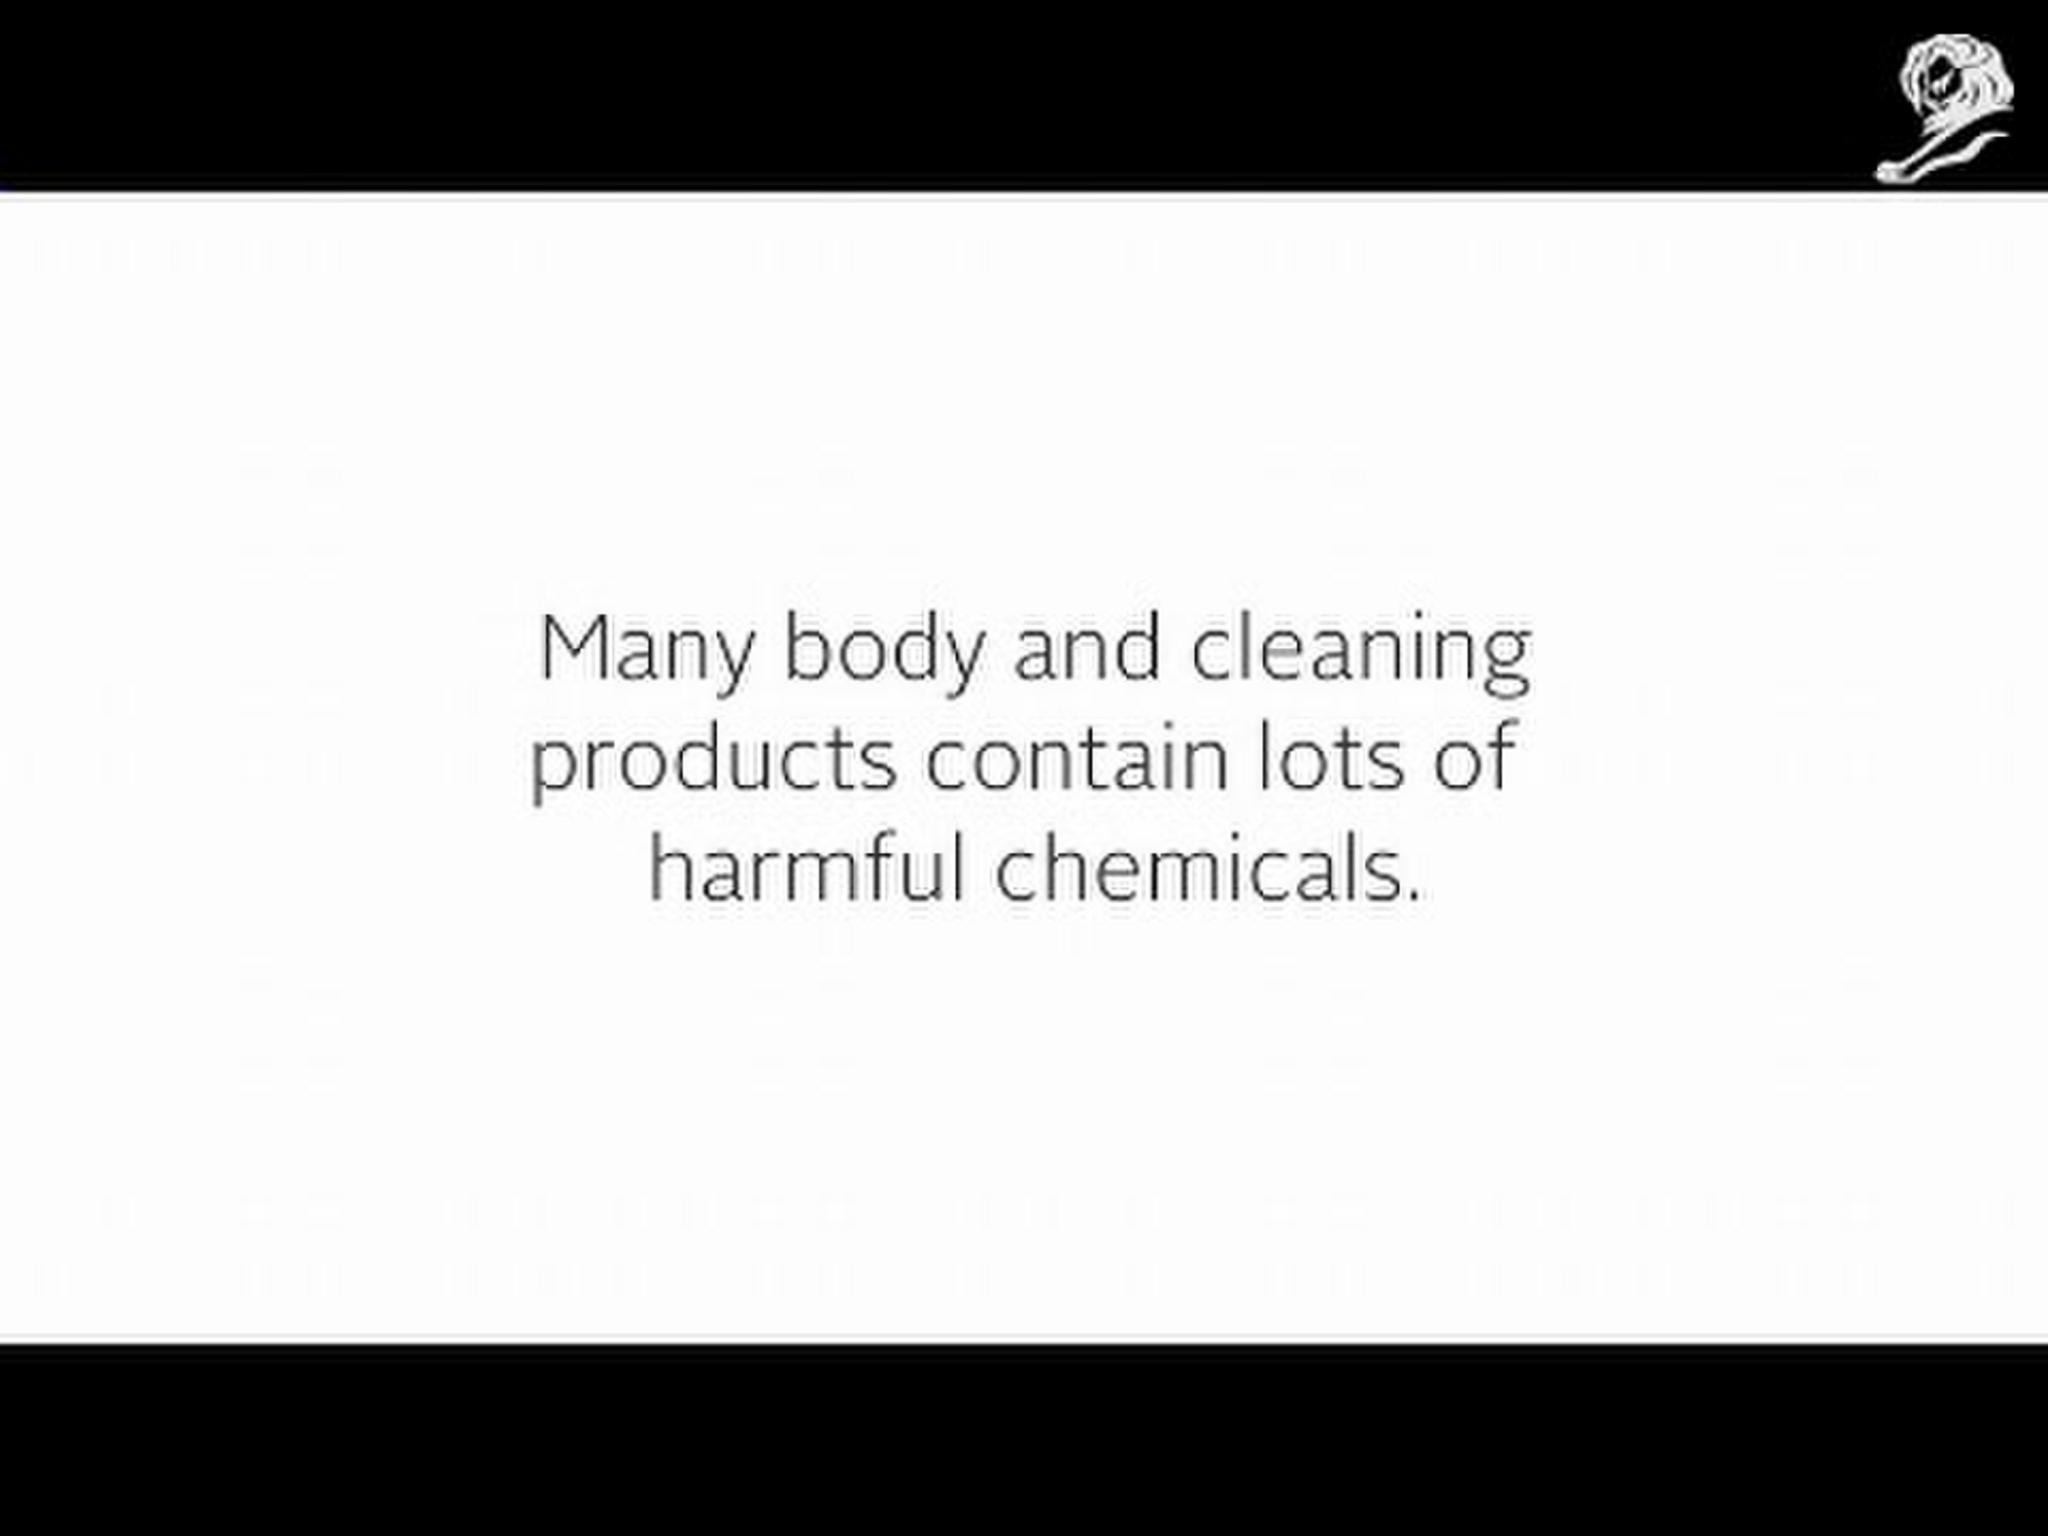 HOUSEHOLD CLEANING AND BABY CARE PRODUCTS